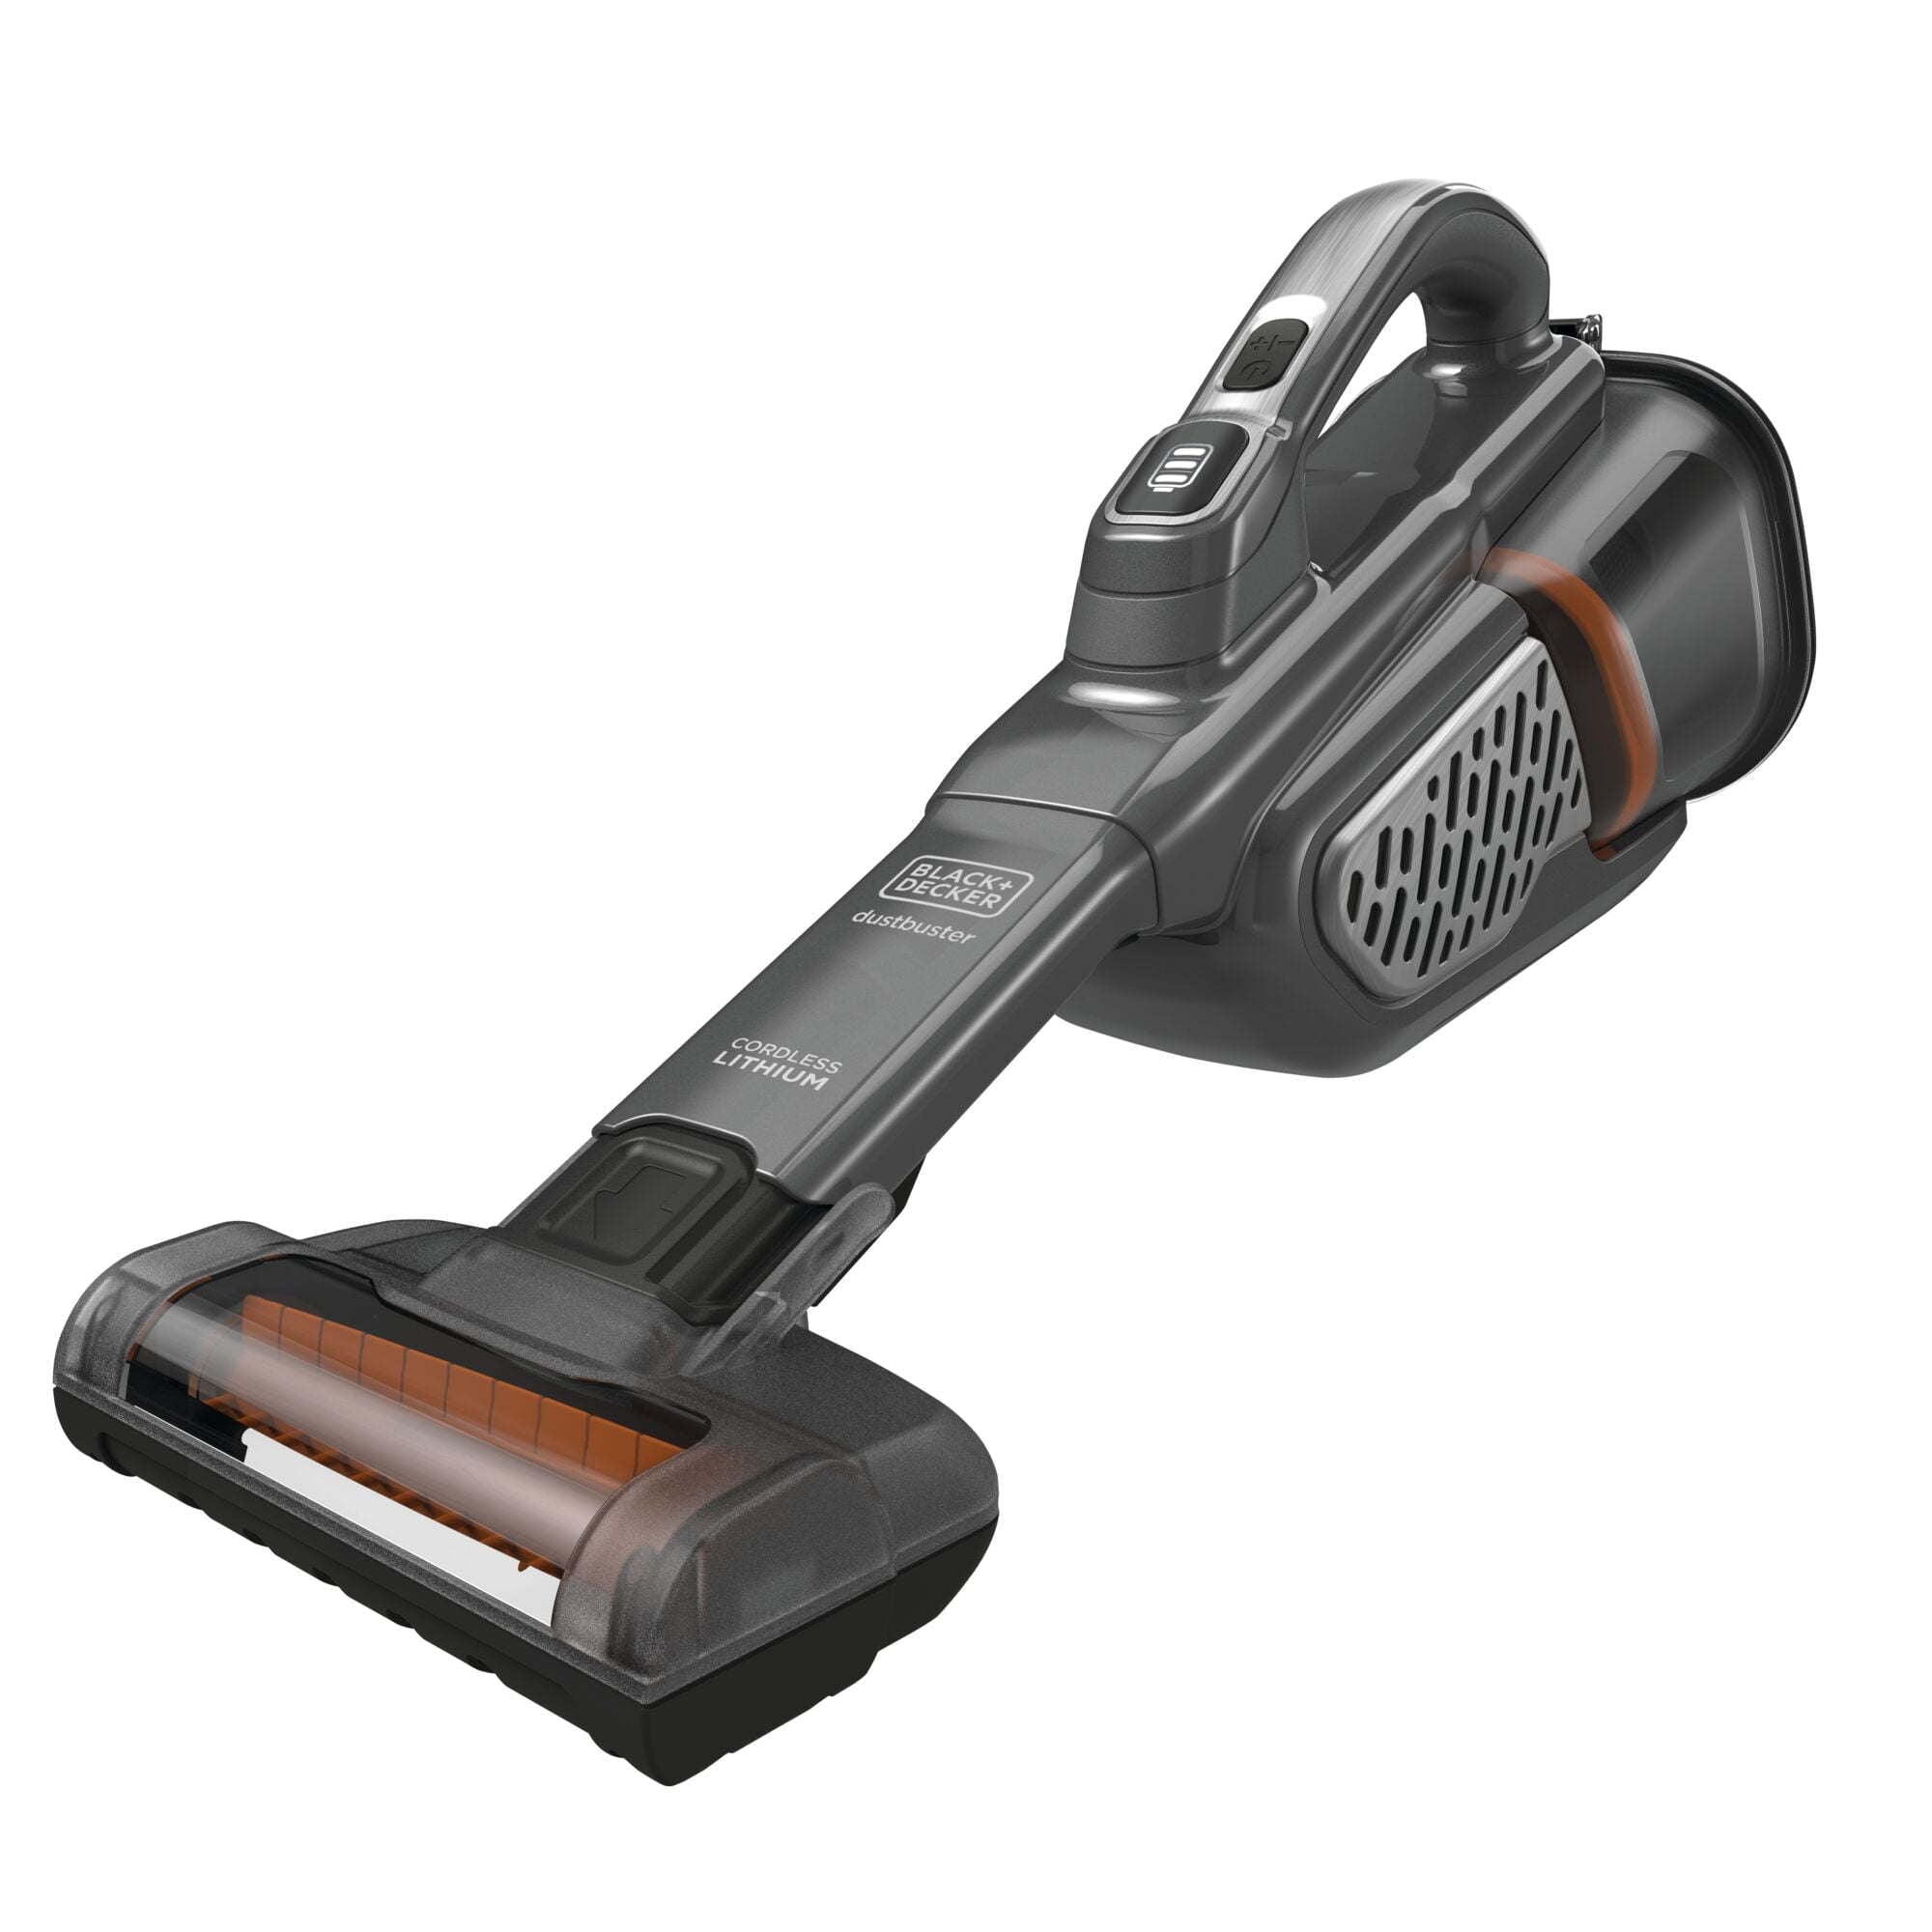 A Dustbuster AdvancedClean+ 12V Lithium Cordless Handheld Vacuum with Powered Pet Head for carpet and upholstery by Black and Decker, designed for effectively removing Pet Hair.